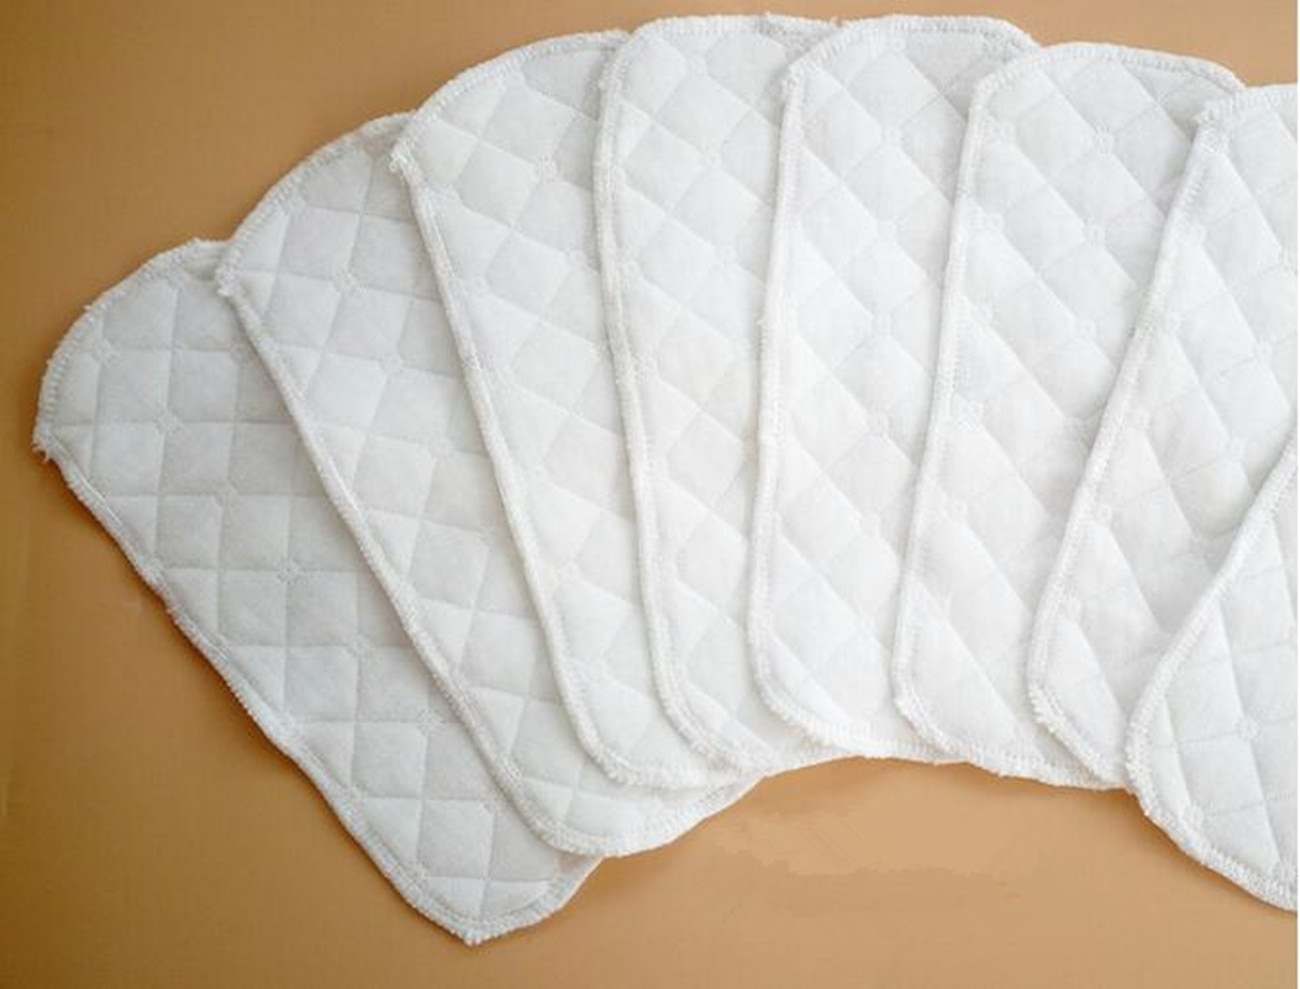 2Pcslot-Thin-Reusable-Menstrual-Cloth-Sanitary-Soft-Pads-Napkin-Waterproof-High-Quality-Panty-Liners-32819042901